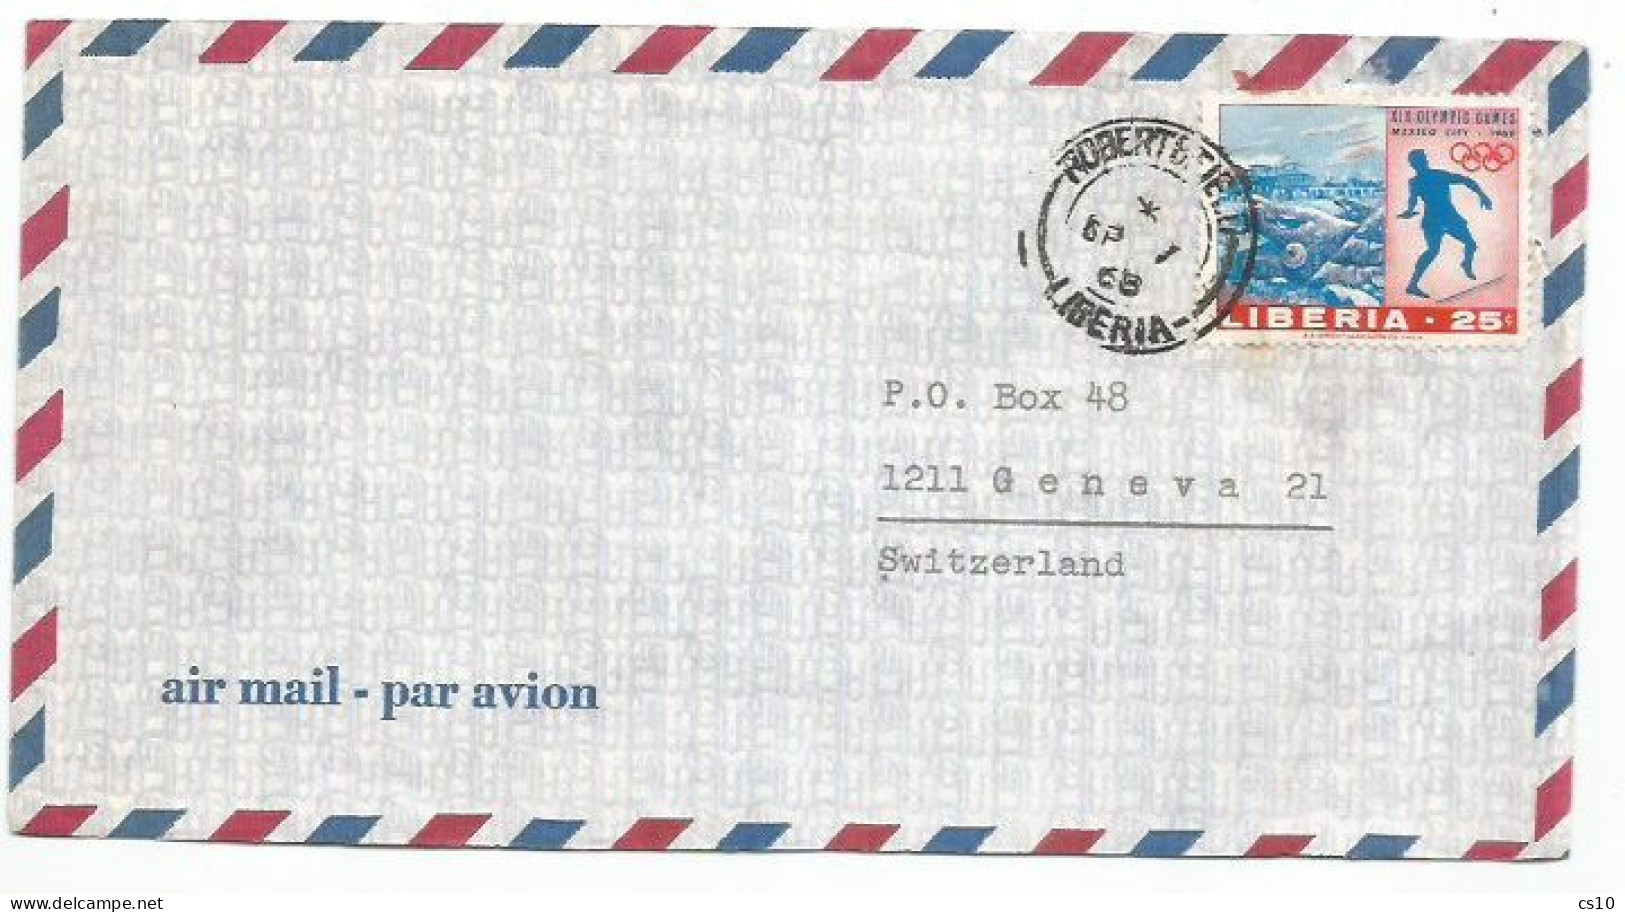 Liberia Airmail Cover Robertsfield 7sep1968 X Suisse With Olympic Games Mexico 1968 C.25 Discus Throw Solo Franking - Atletica